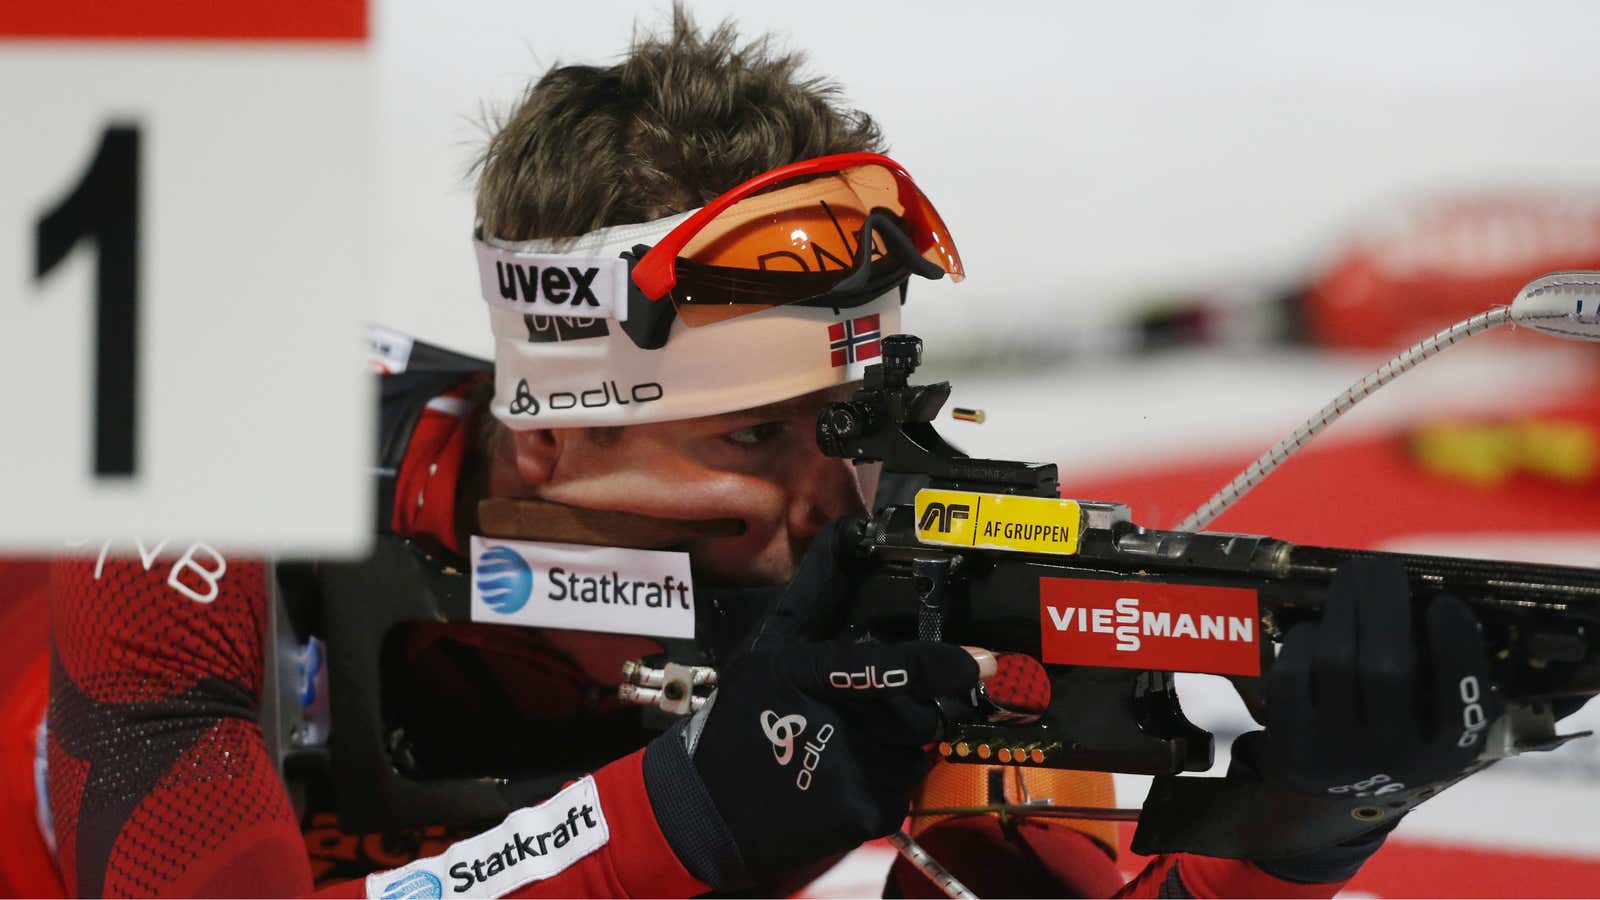 This year, the Biathlon IBU World Championships are being held in Nove Mesto, Czech Republic.